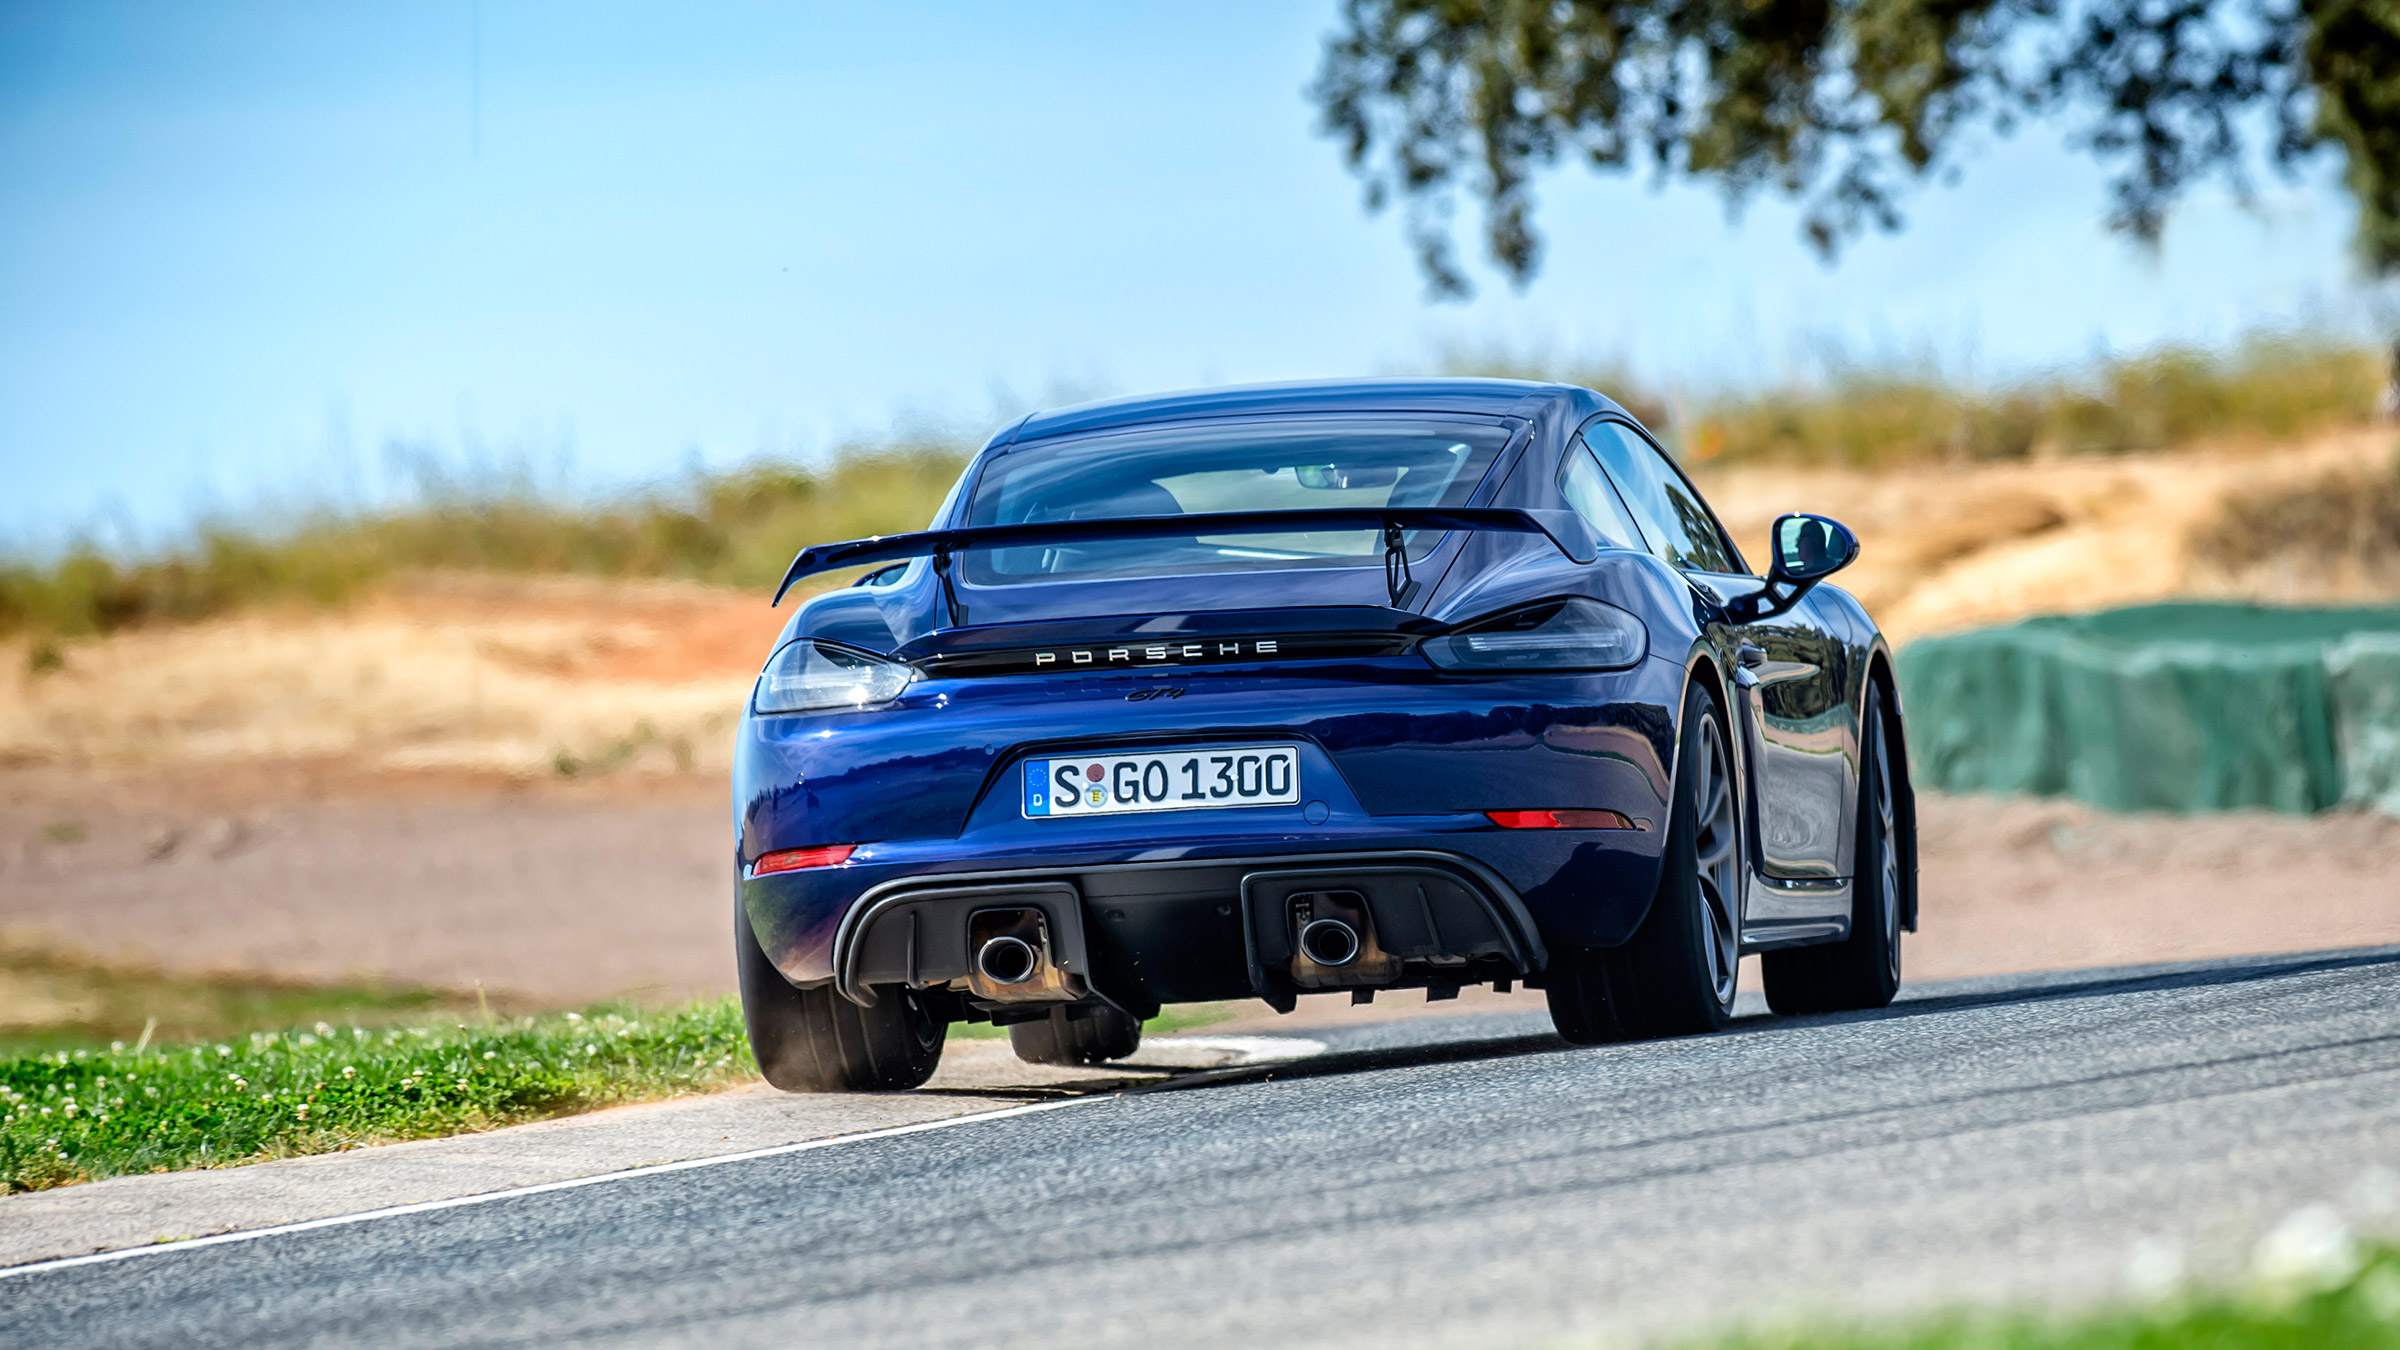 Porsche 718 Cayman Gt4 Boxster Spyder And Gts 4 0s Now Available With Pdk Evo